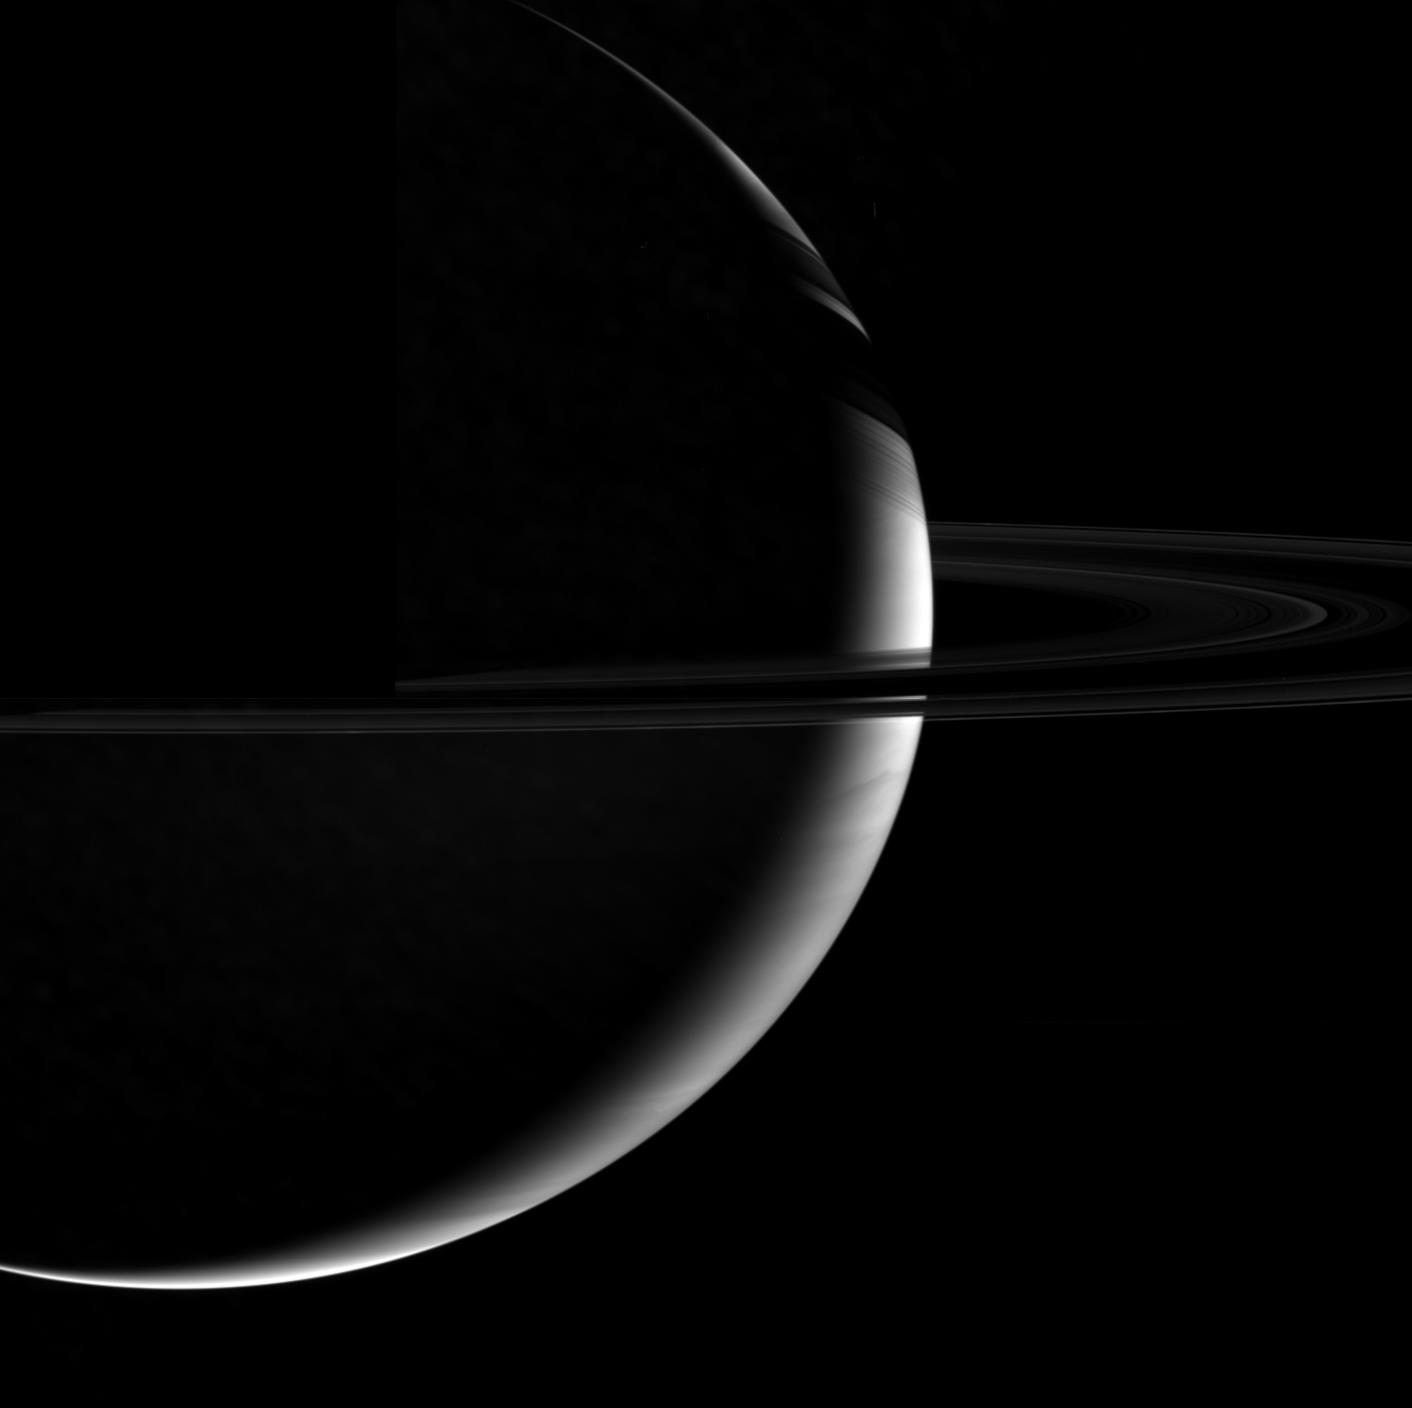 Saturn and the "dark" side of its rings